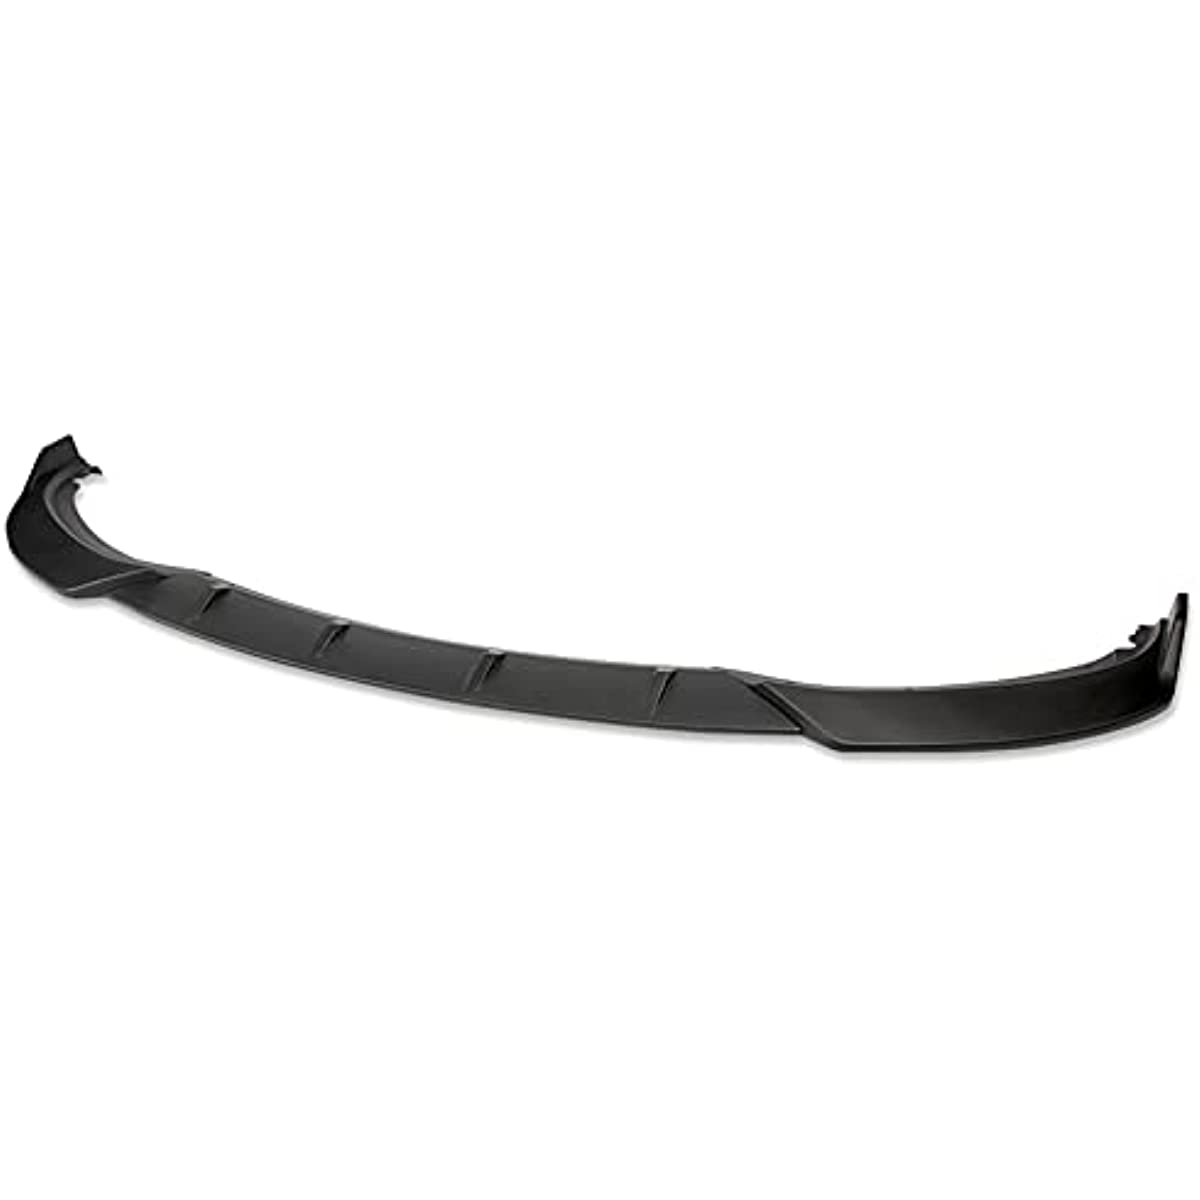 Front Lip compatible with 2016-2019 BMW 3-Series F30 F35 330i 318i 320i 328d